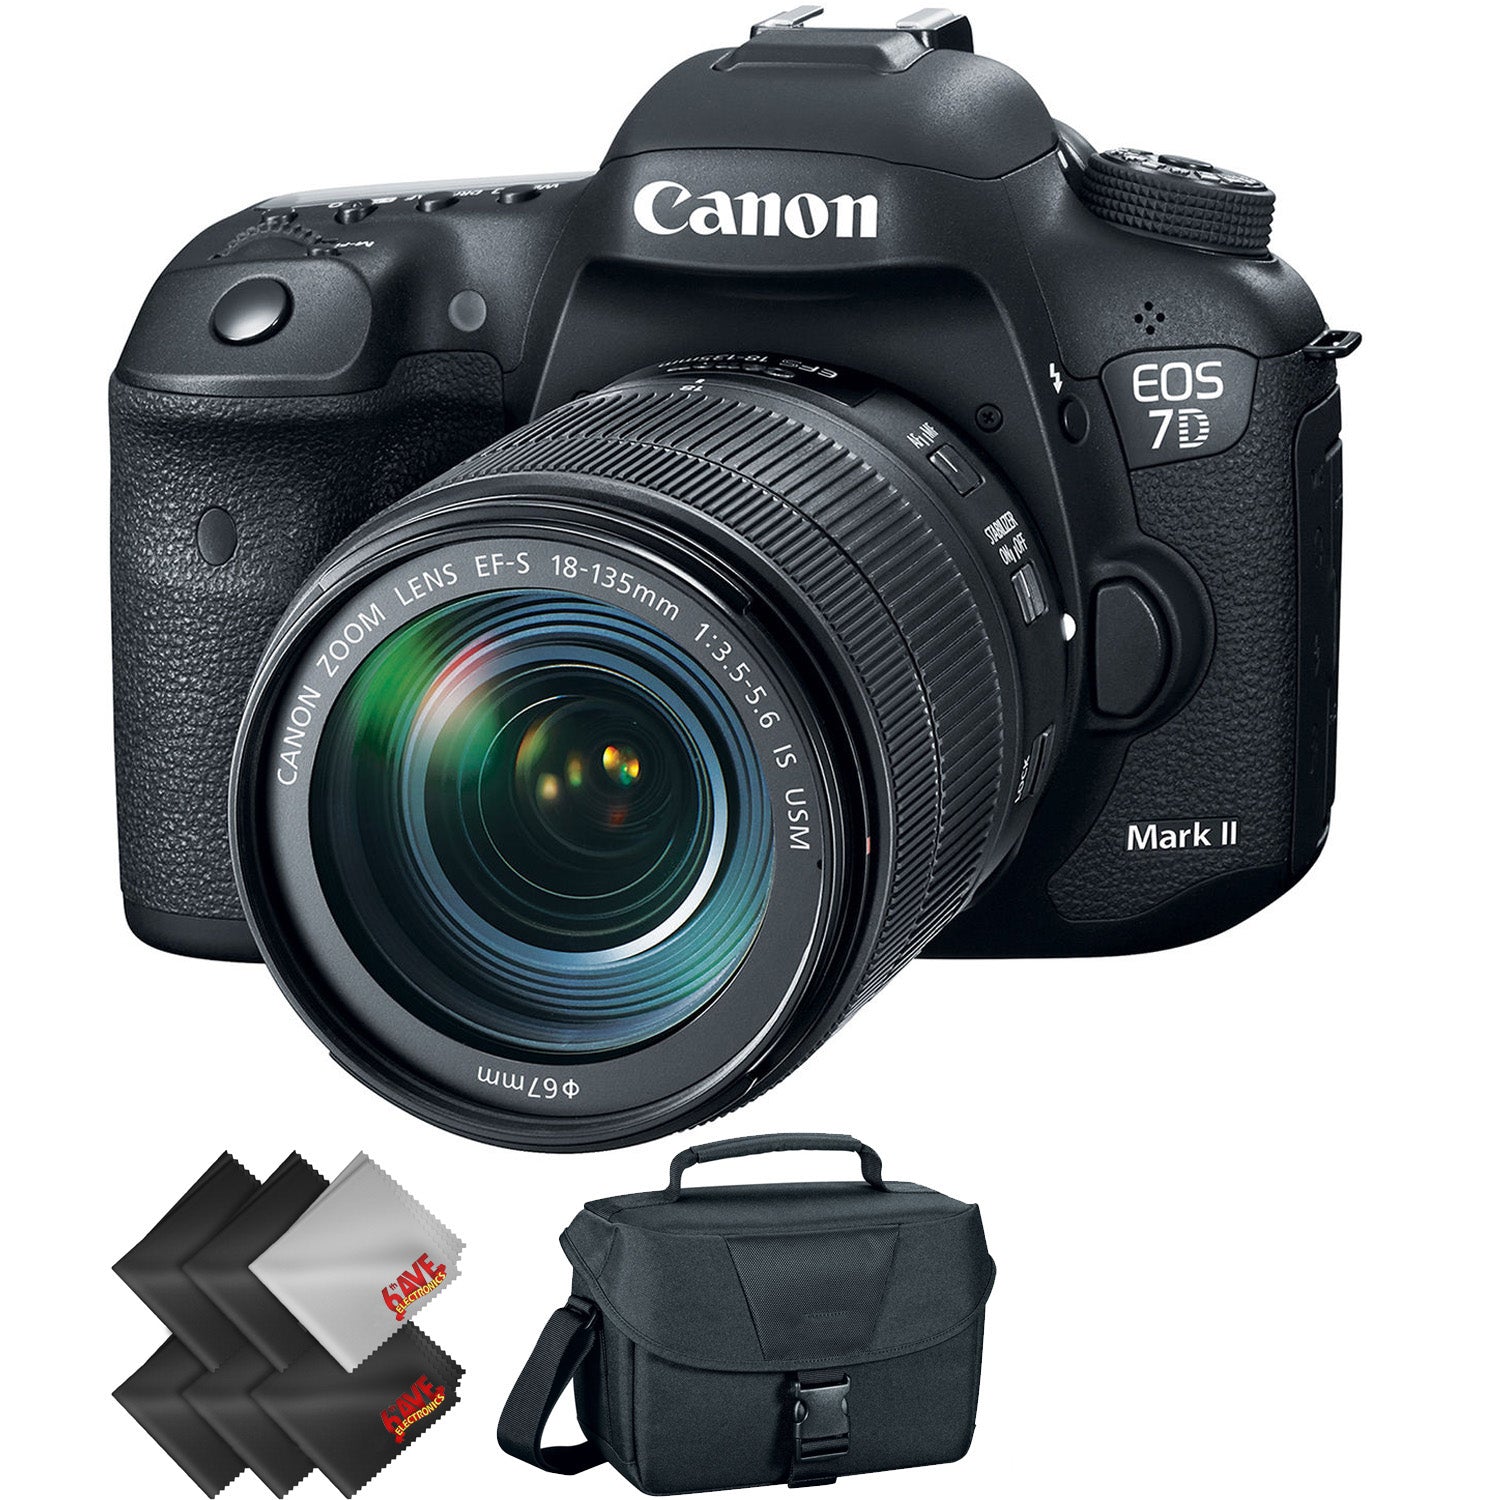 Canon EOS 7D Mark II DSLR Camera with 18-135mm f/3.5-5.6 is USM Lens & W-E1 Wi-Fi Adapter + 1 Year Warranty